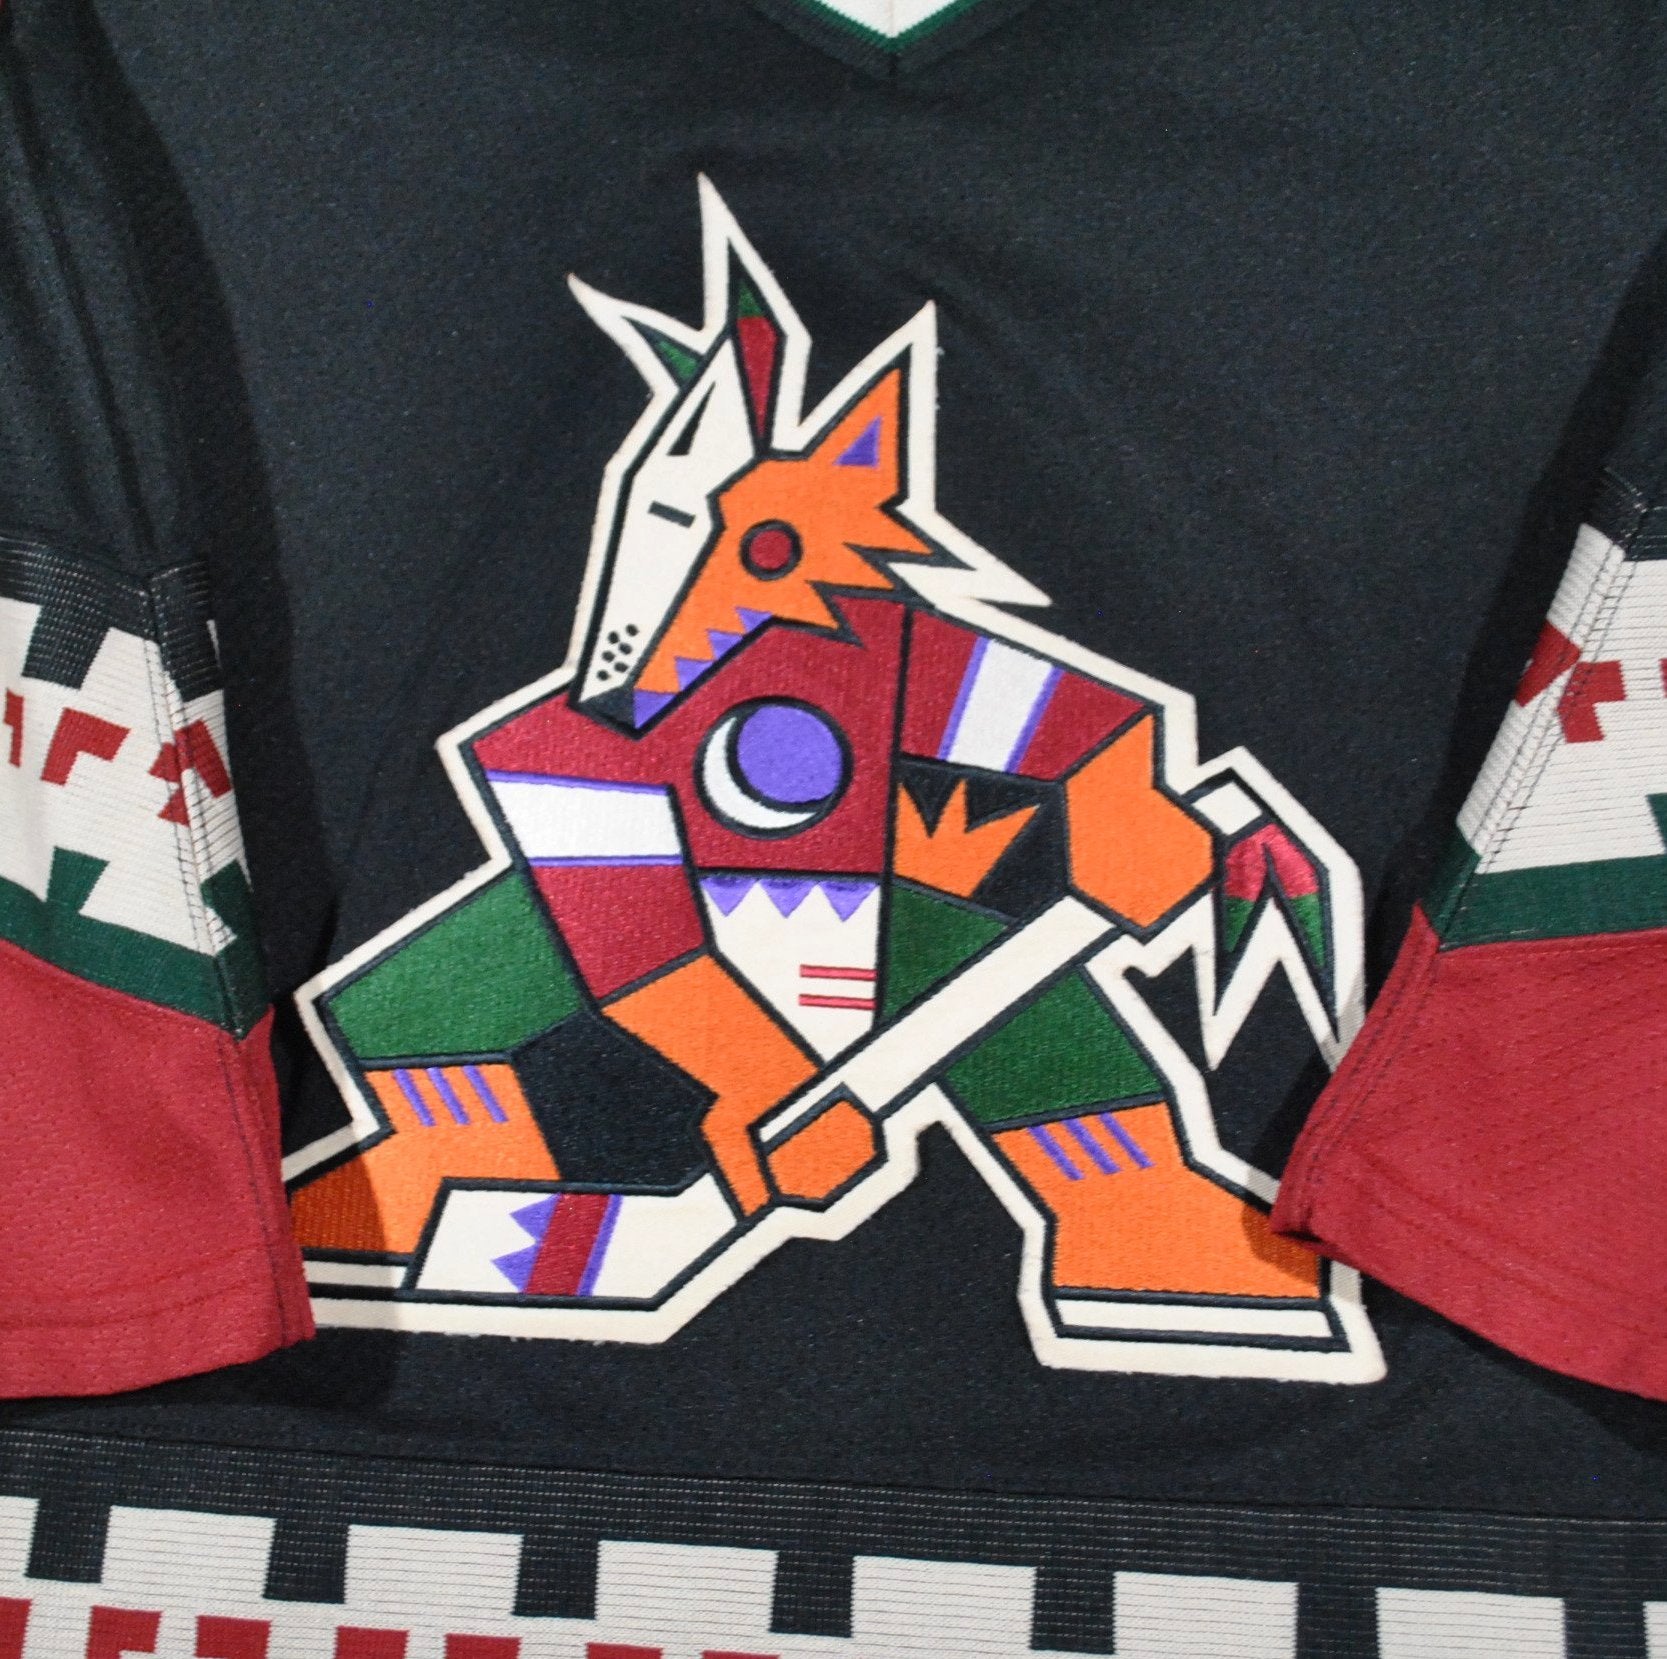 Ideal Place To Buy Phoenix Coyotes Jersey 90s by throwbackvault on  DeviantArt